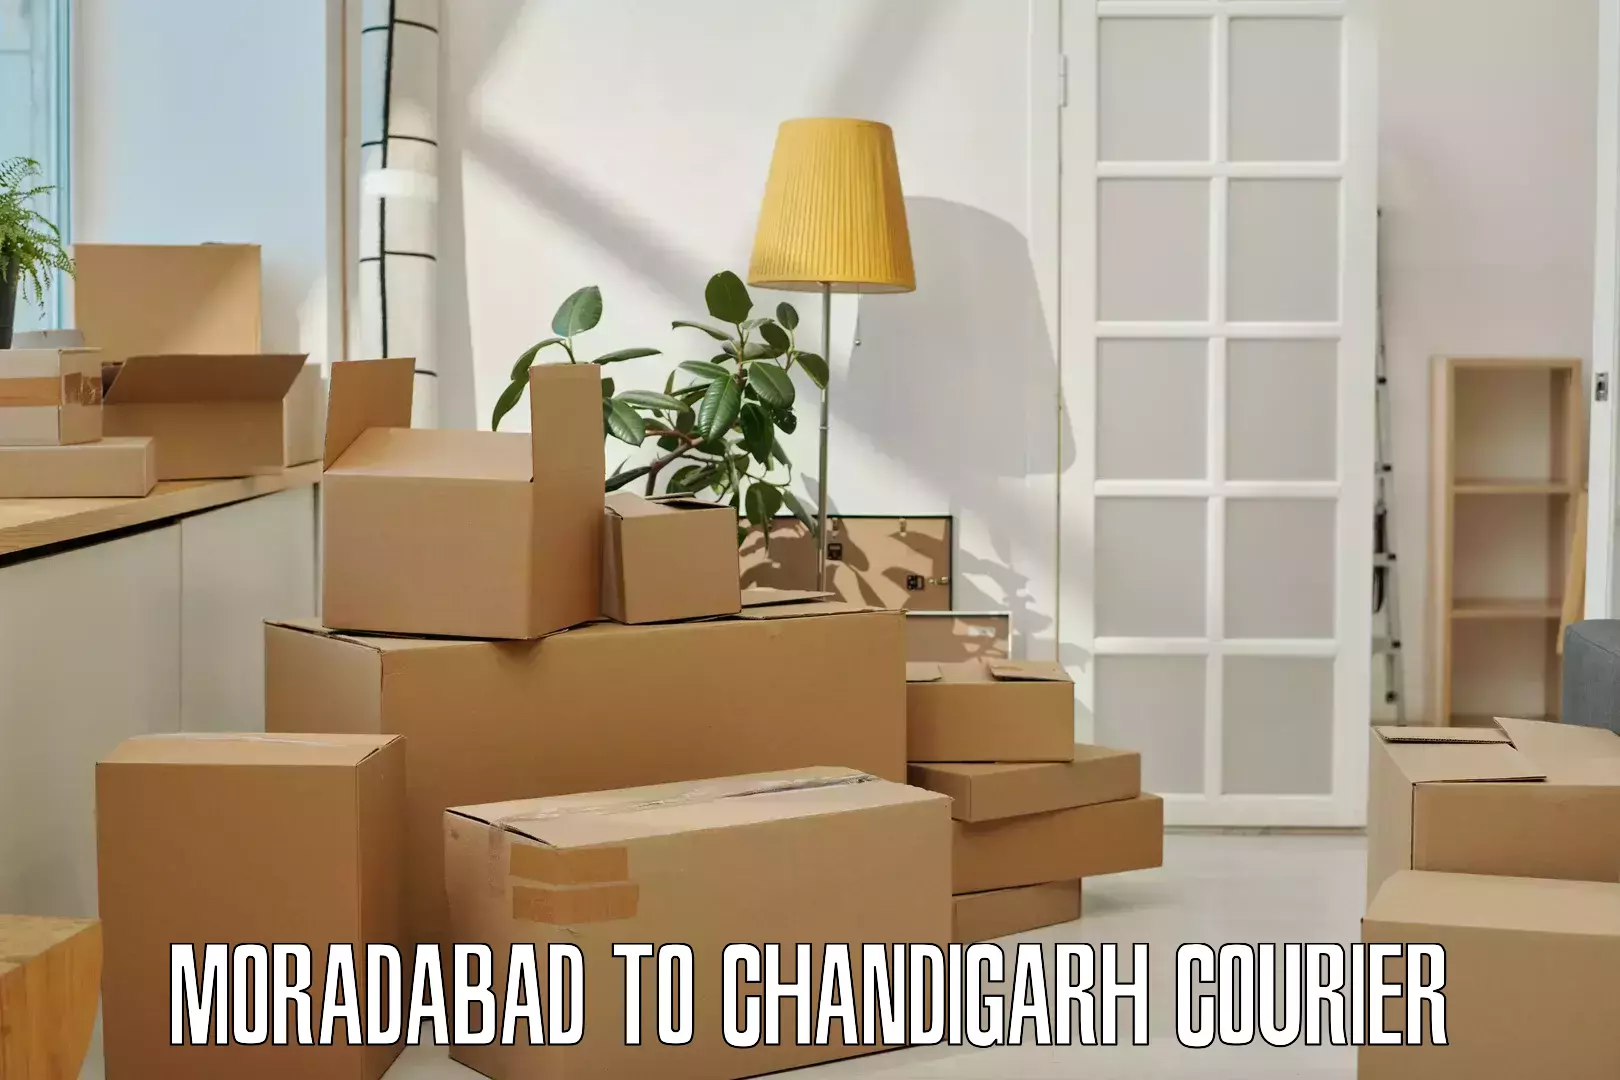 Express package services Moradabad to Chandigarh